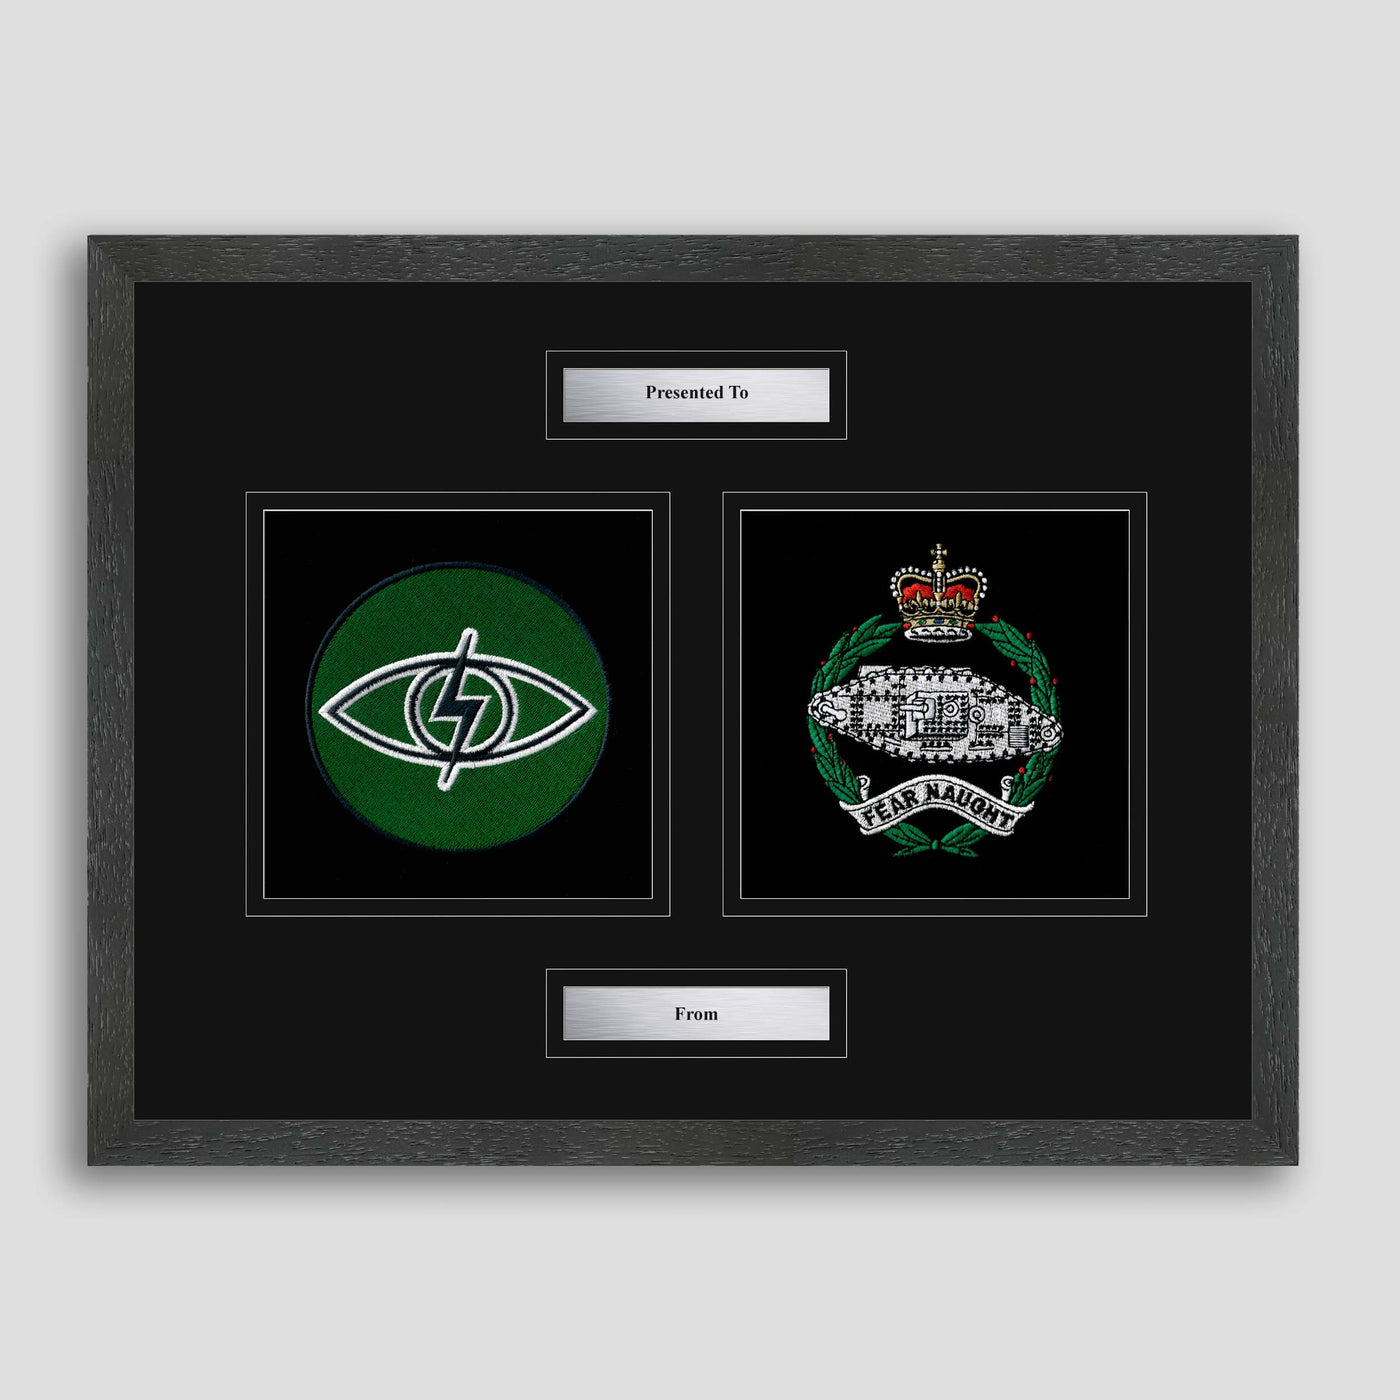 Royal Tank Regiment & Cyclops Squadron Framed Military Embroidery Presentation